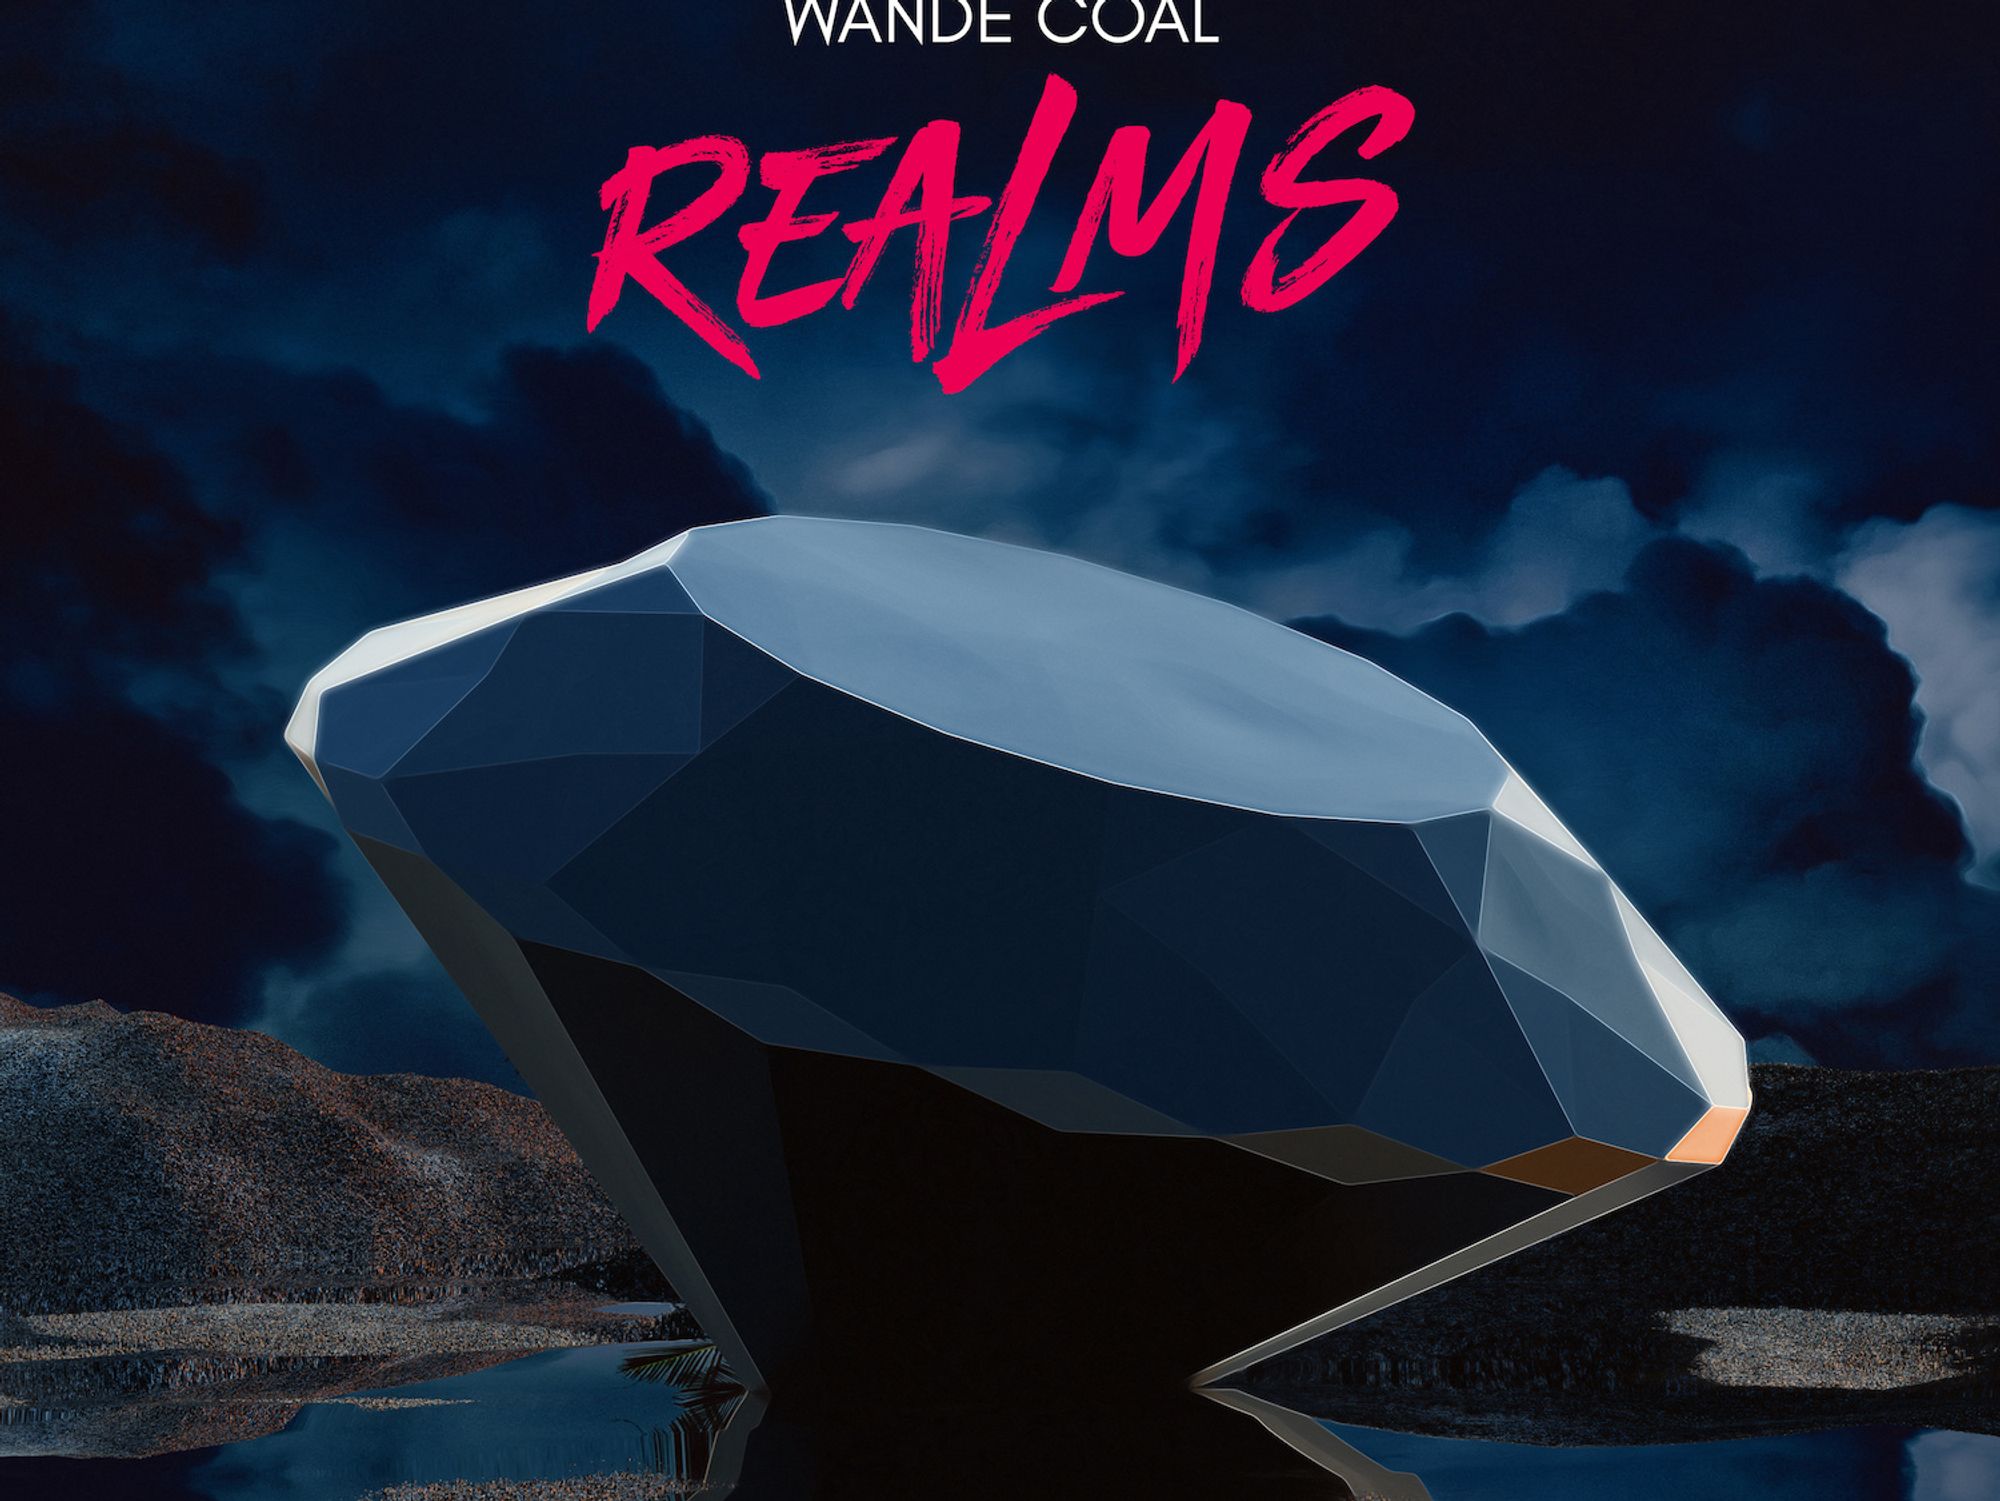 Listen to Wande Coal's New ‘Realms’ EP